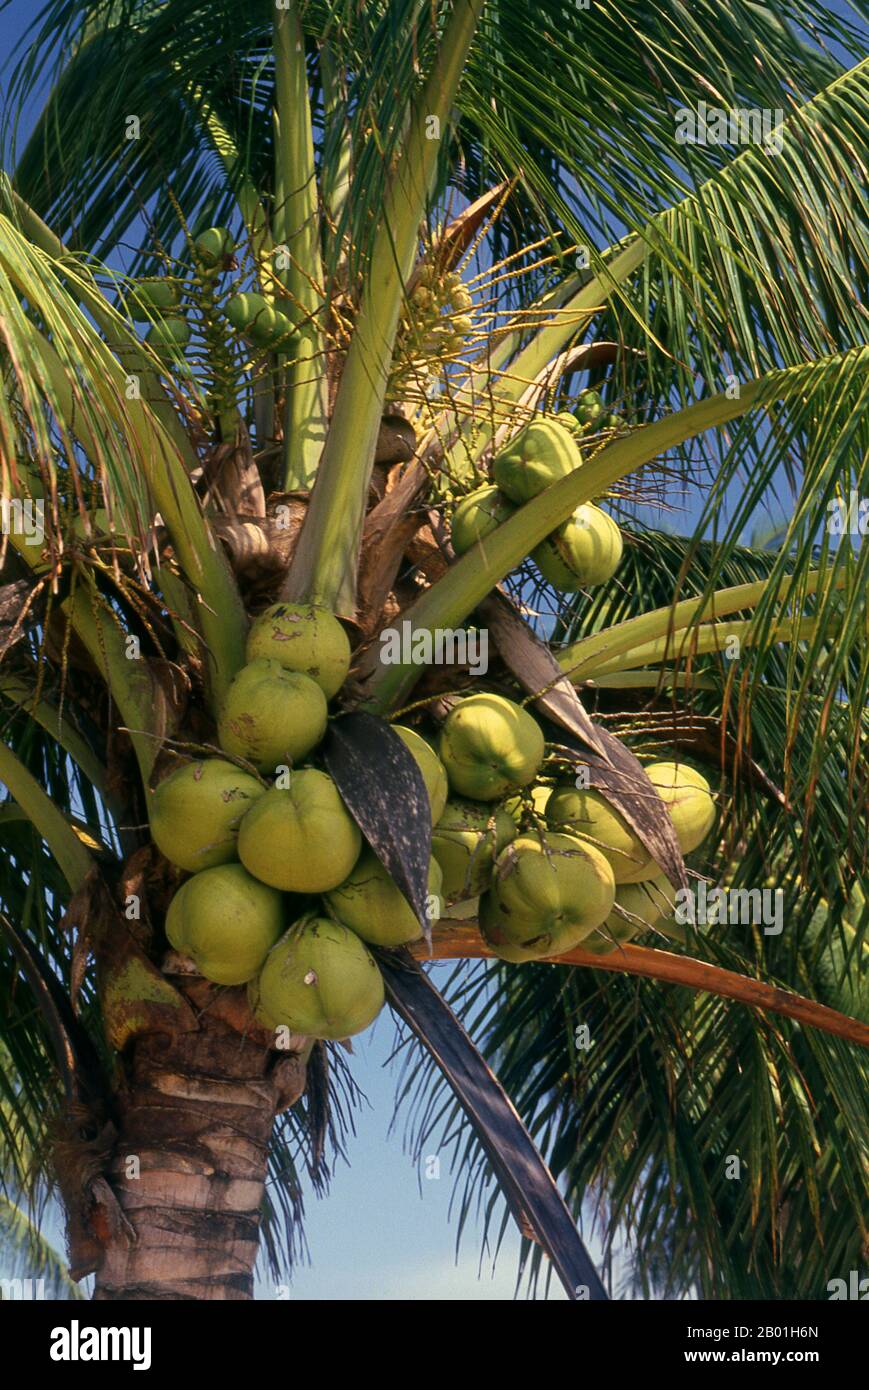 Thailand: Ripening coconuts, Andaman Sea coast.  The coconut palm, or Cocos nucifera, is valued not just for its beauty, but also as a lucrative cash crop. Cultivated throughout the South Seas and Indian Ocean regions, it provides food, drink, shelter, transport, fuel, medicine, and even clothing for millions of people.  The coconut palm lives for around 60 years, and produces around 70-80 nuts annually. The trees are sometimes 40-50 metres (130-160 feet) high. Stock Photo